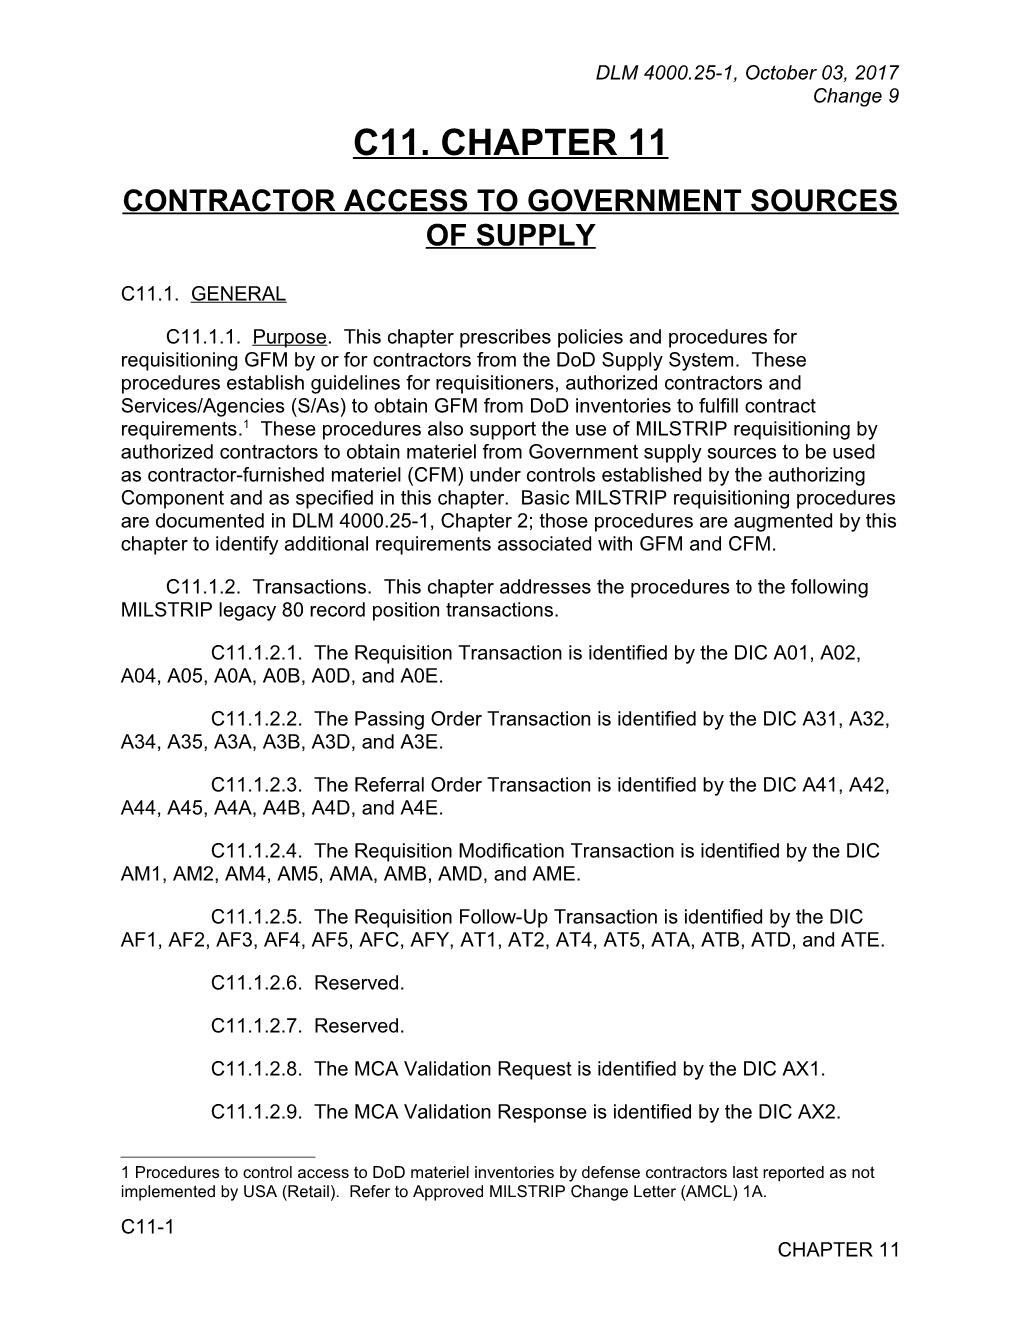 Chapter 11 - Contractor Access to Government Source of Supply